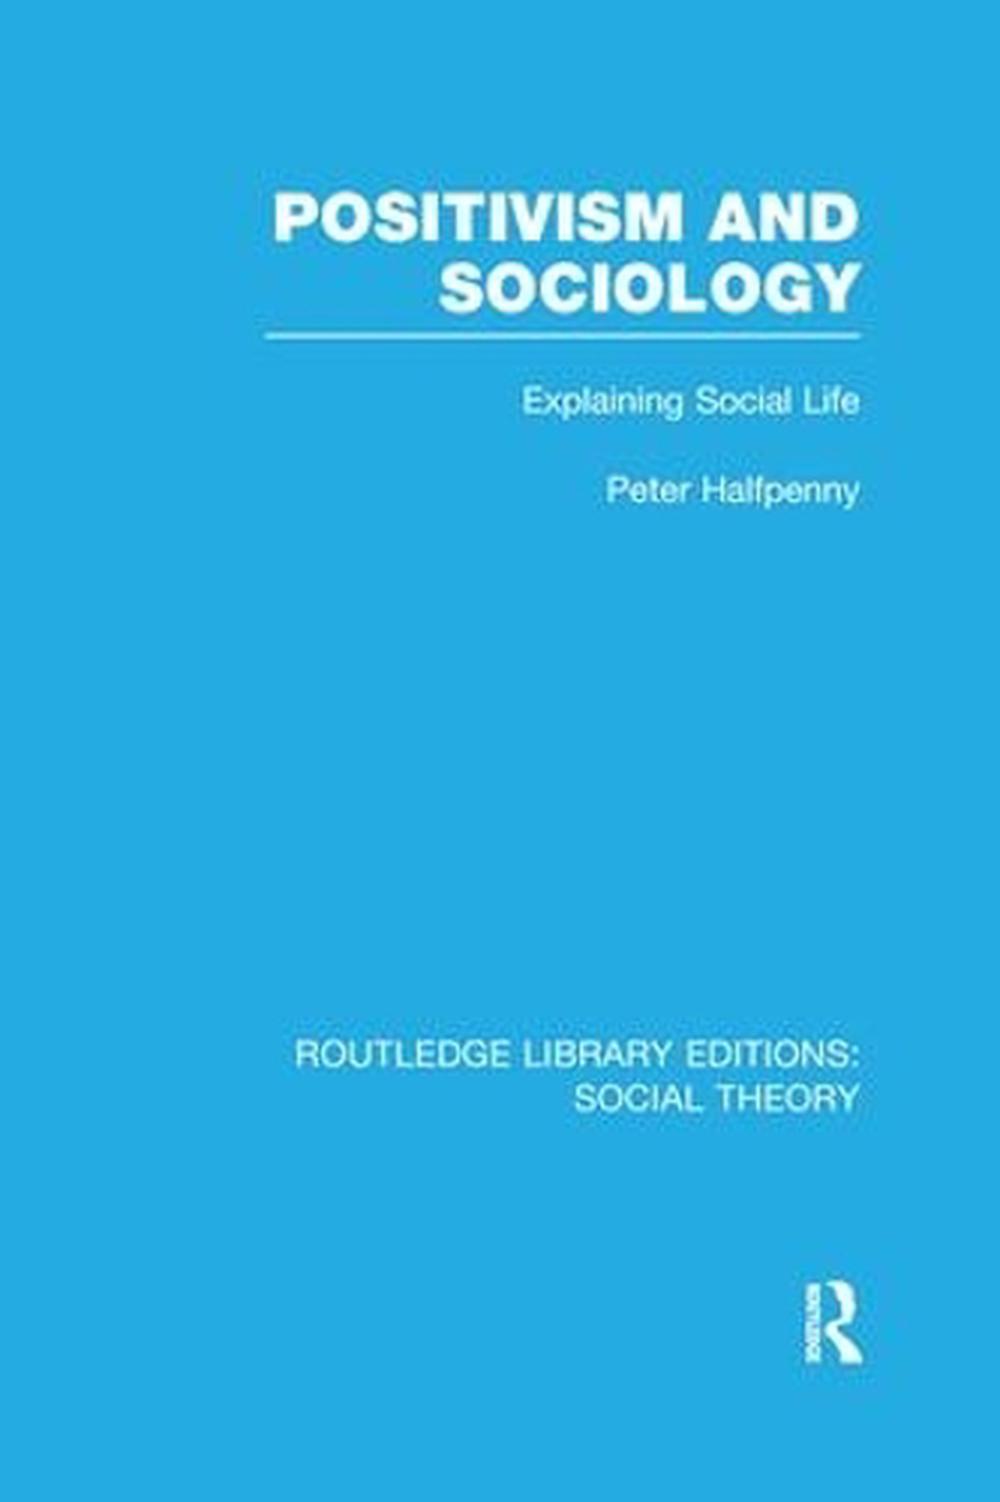 Positivism and Sociology: Explaining Social Life by Peter Halfpenny ...